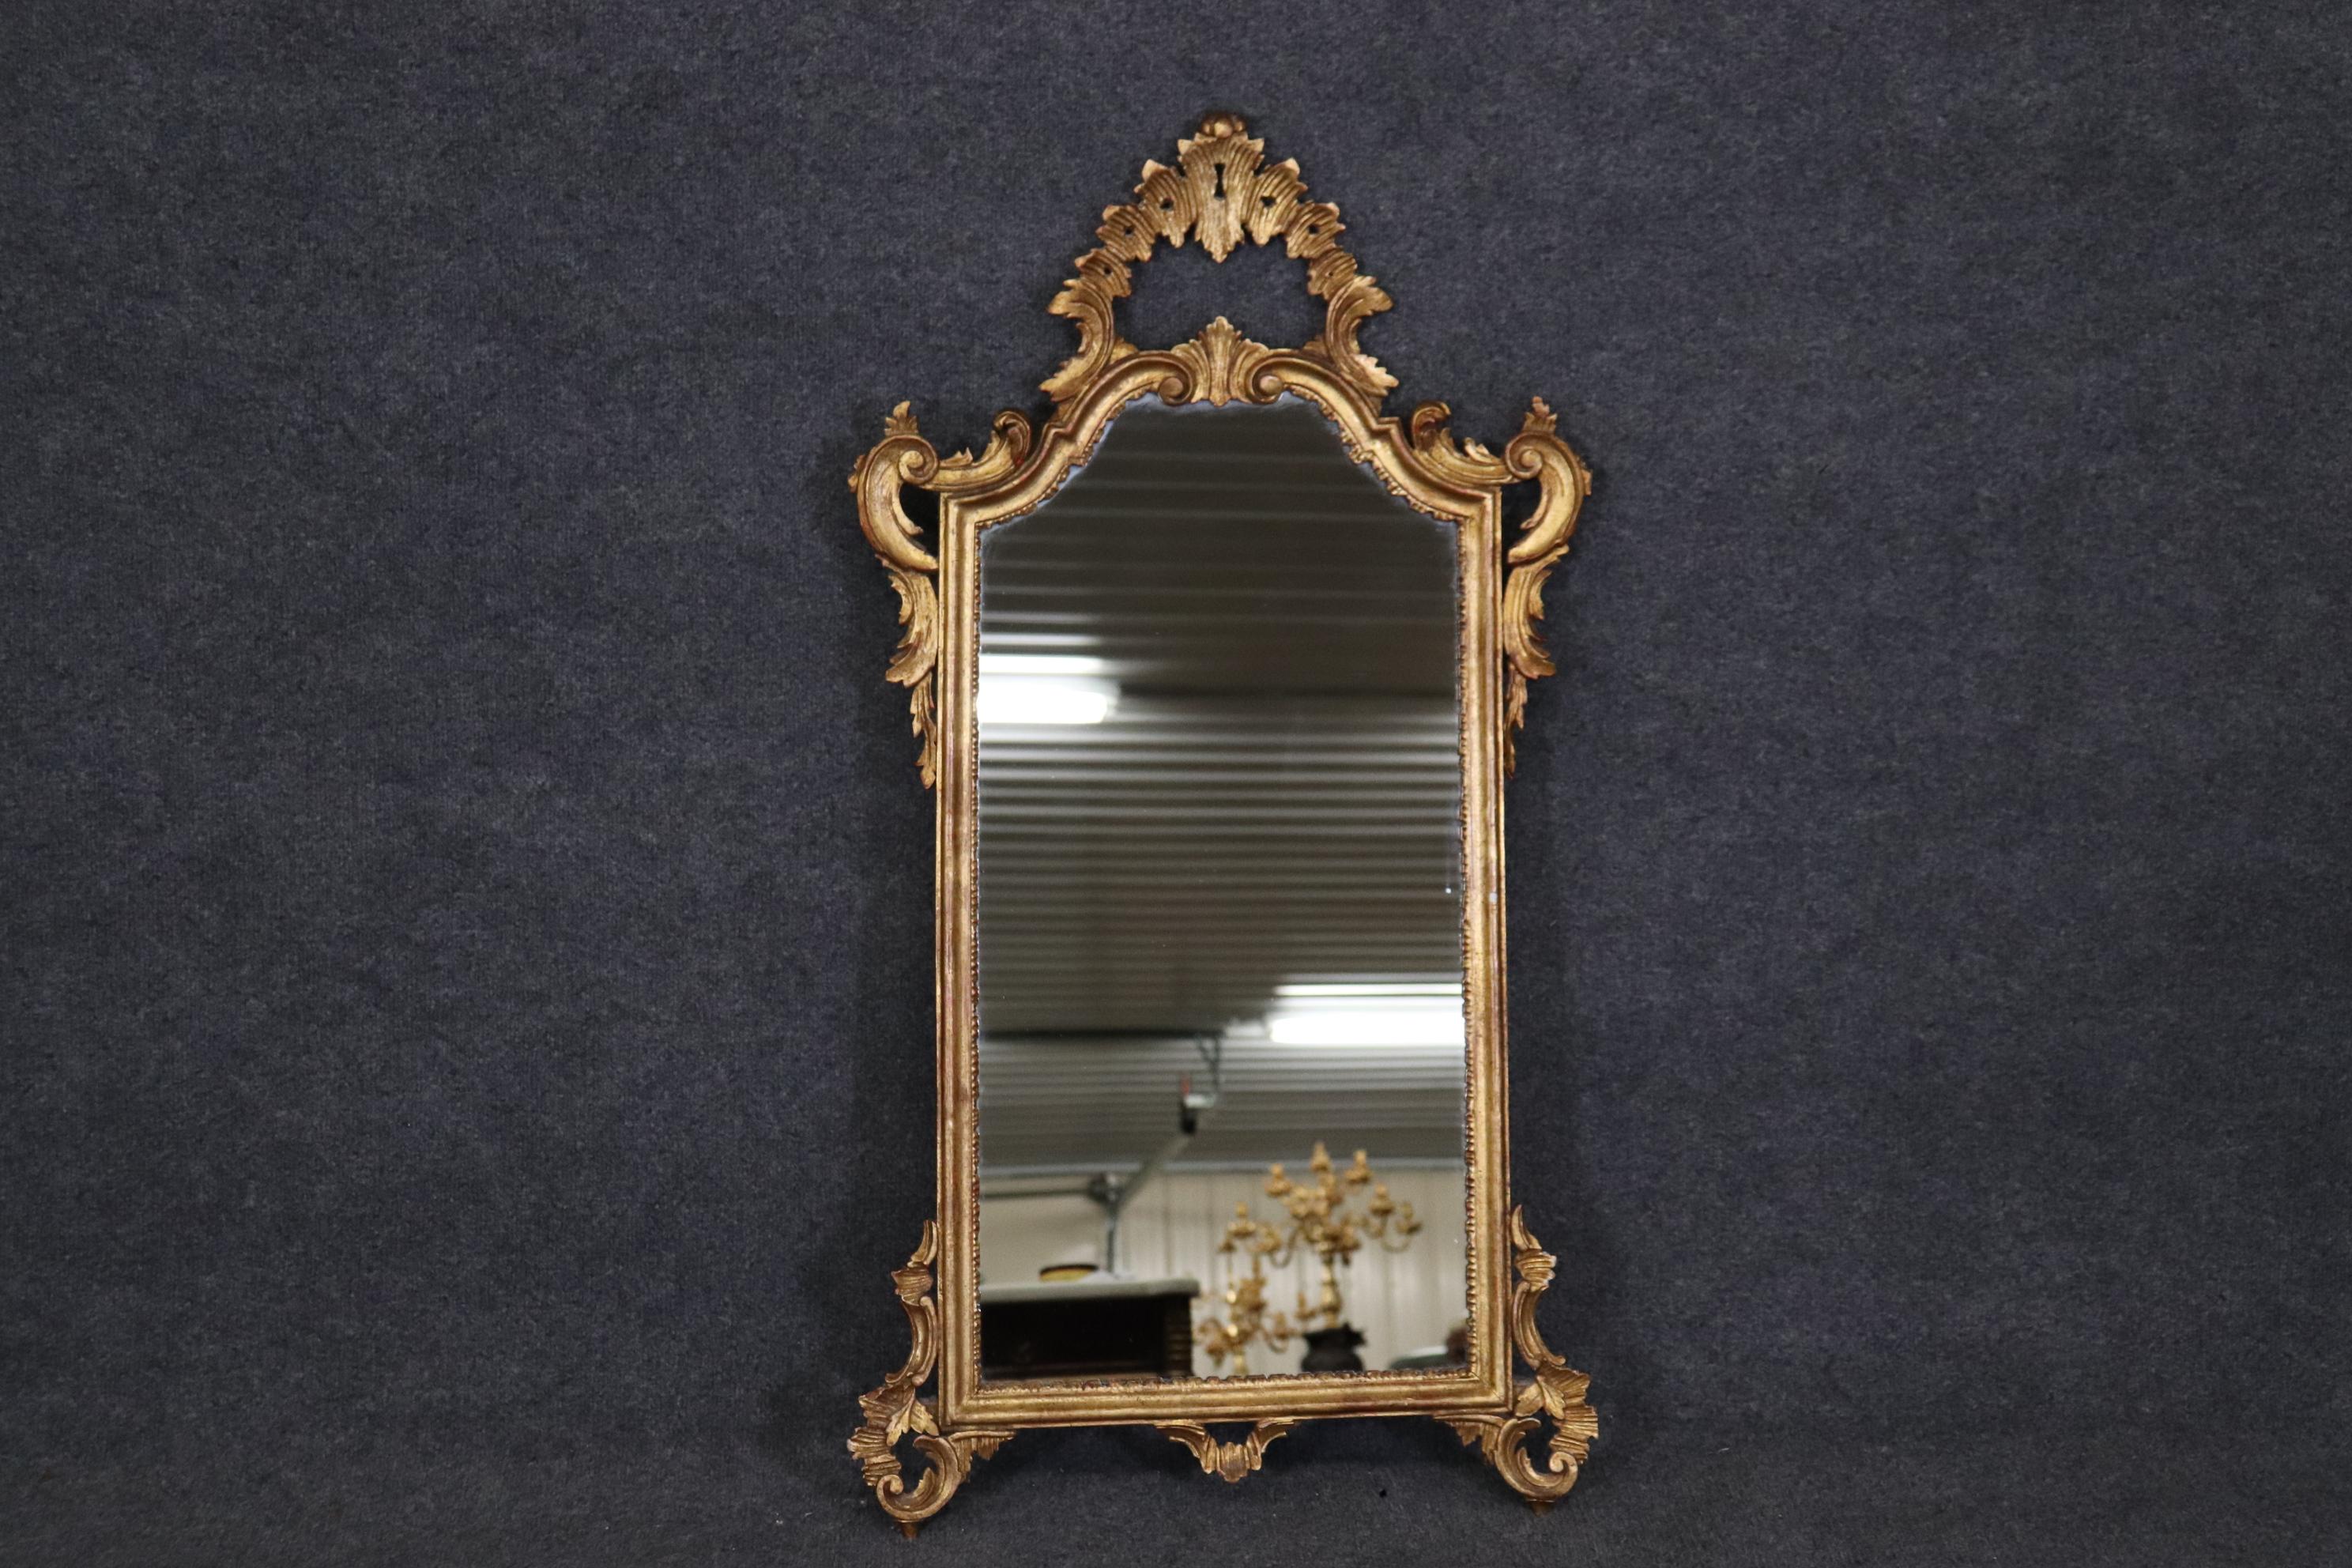 This is a gorgeous vintage 1960s era Italian made carved walnut mirror with genuine gold leaf and in good condition. The mirror measures 56.75 tall x 34.75 wide x 6 deep. 